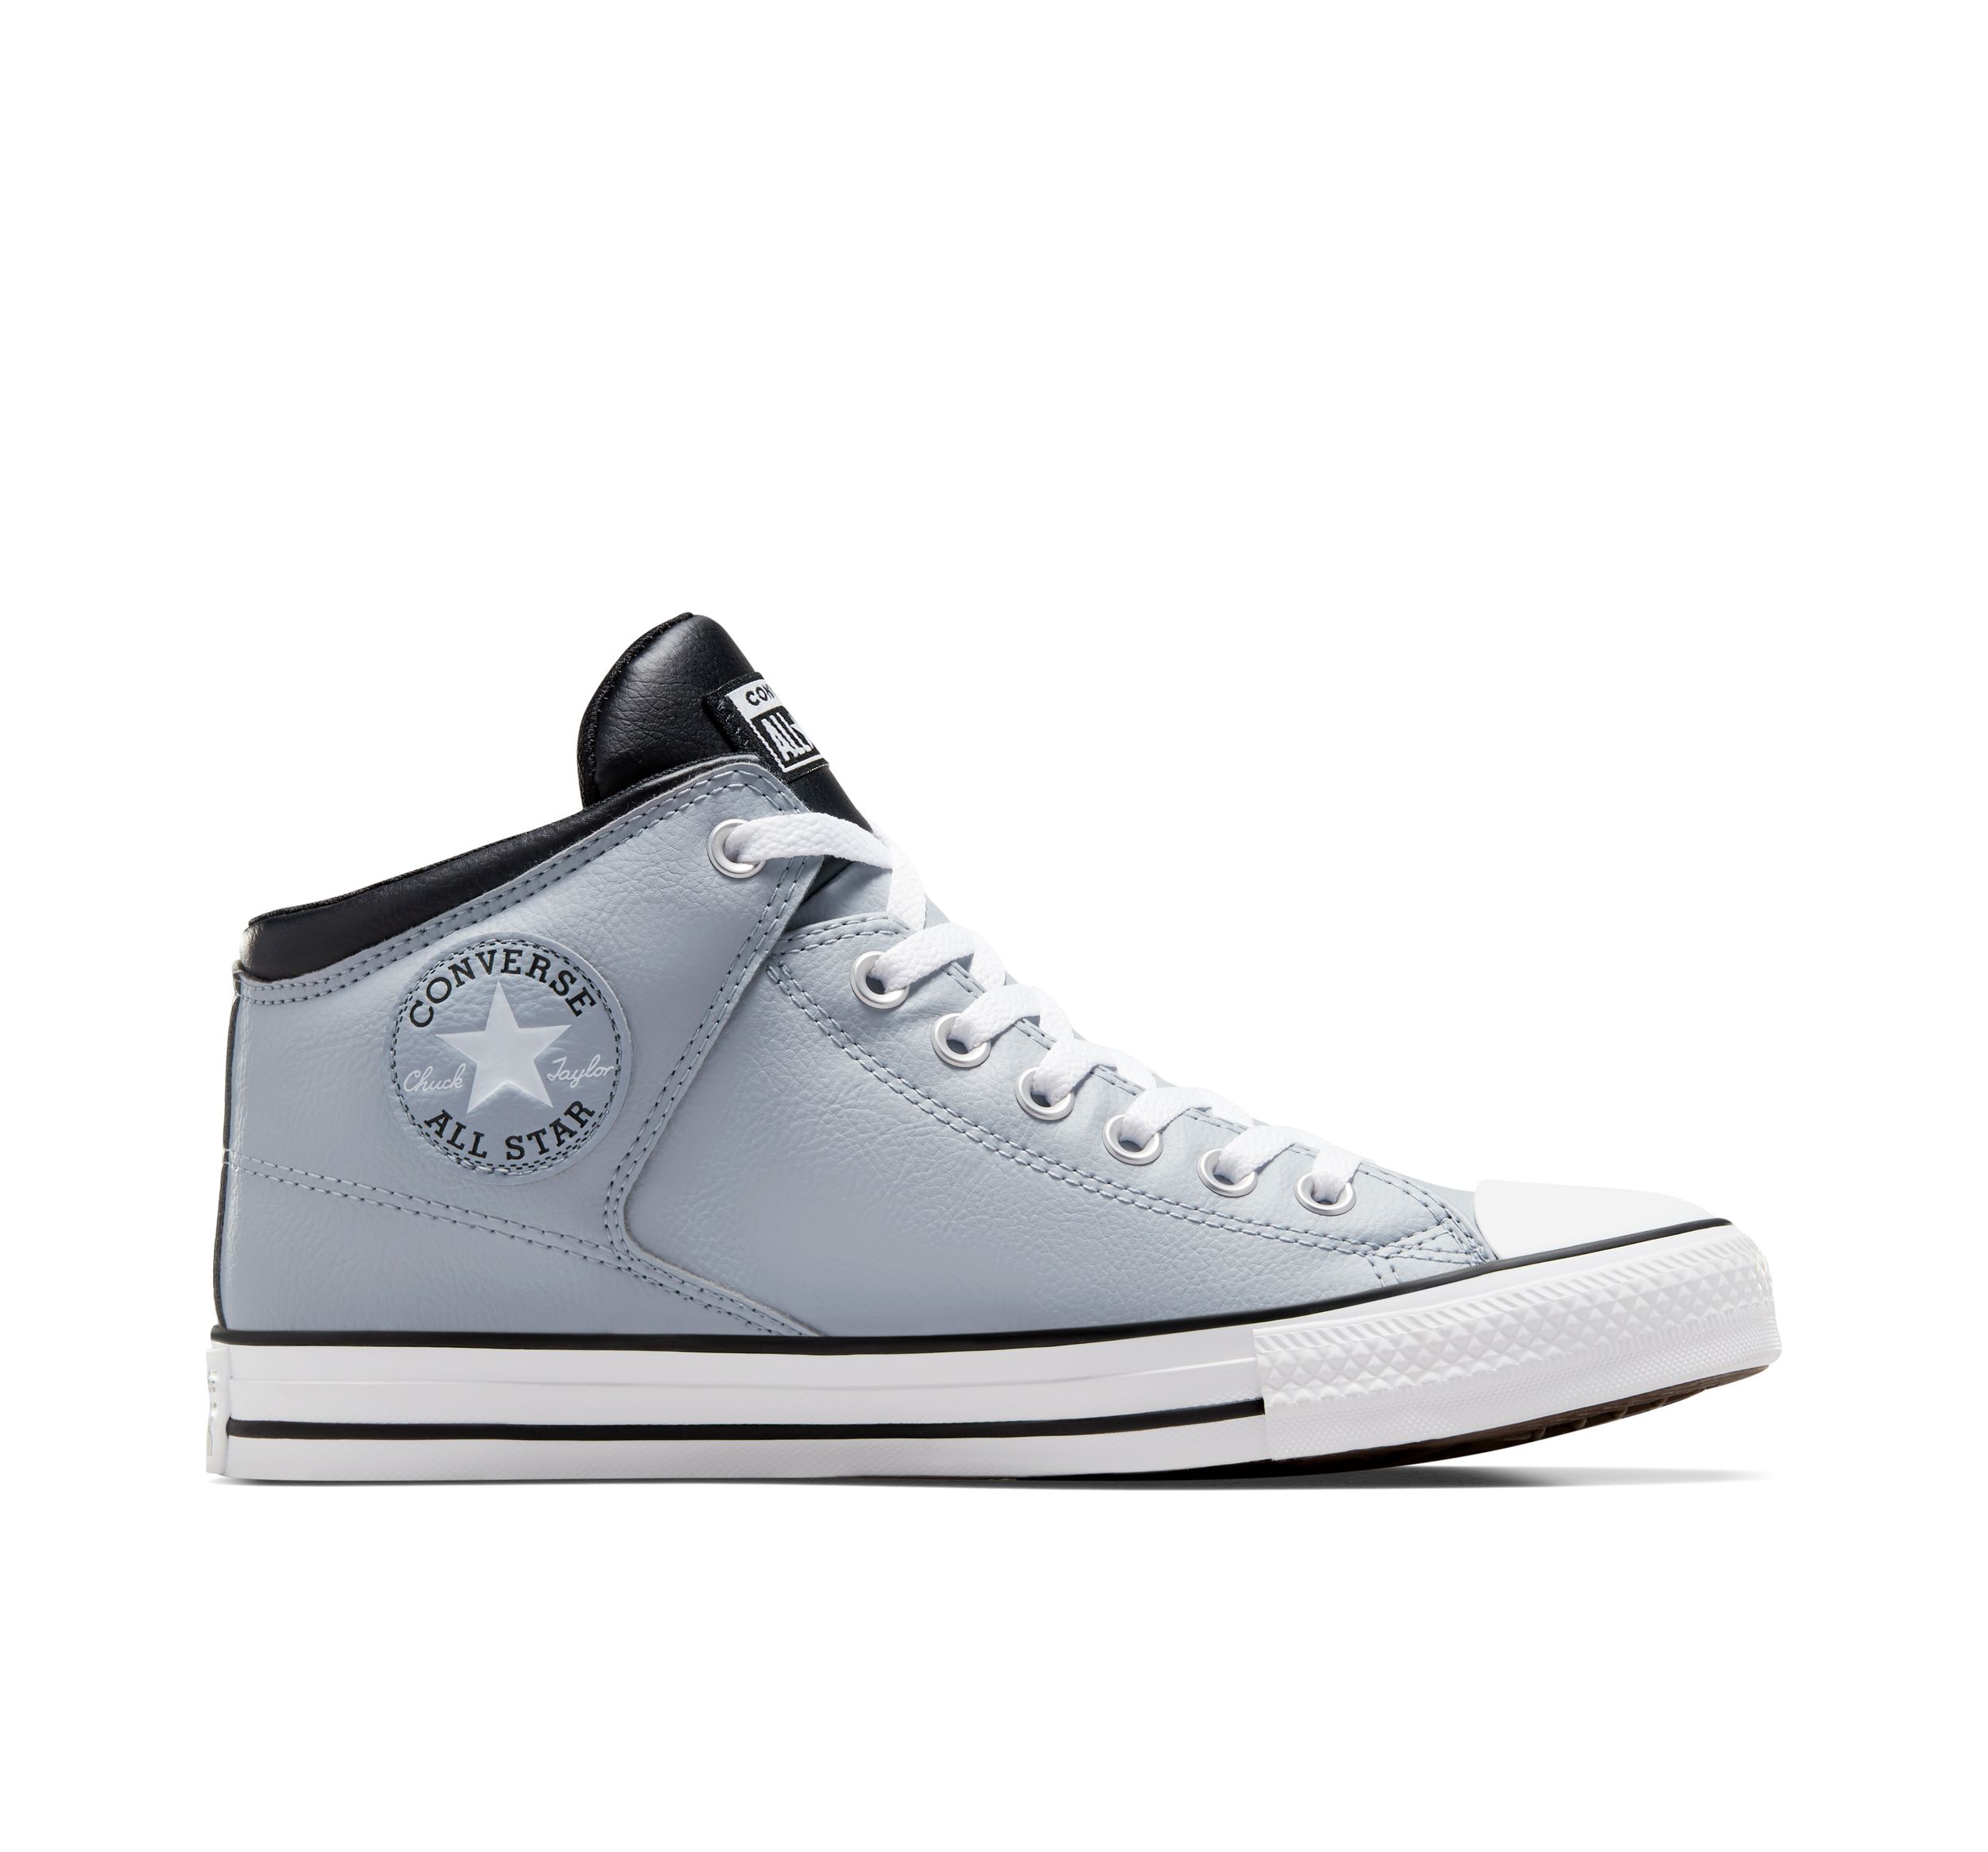 Image of Converse Men's Chuck Taylor All Star Mid High Street Shoes